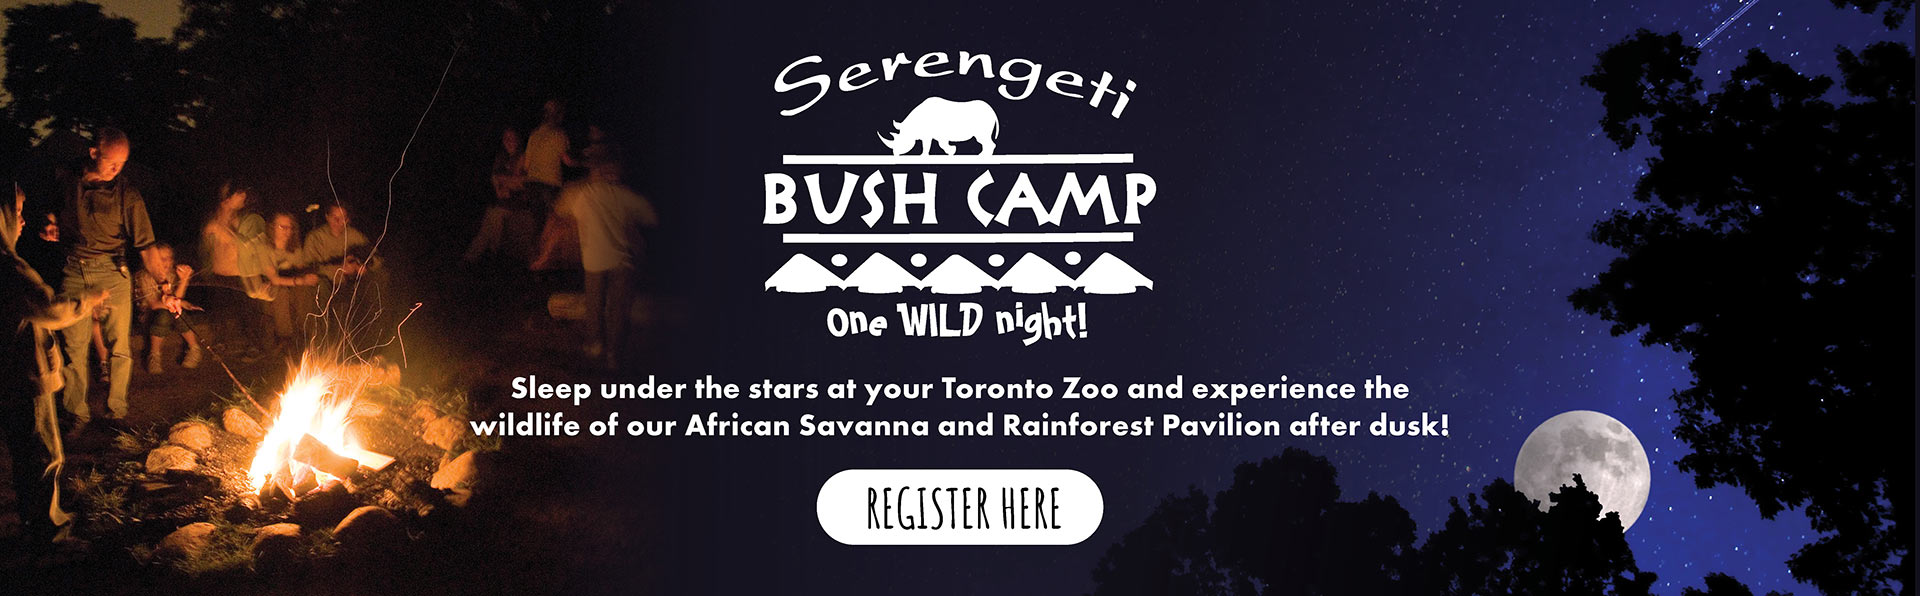 Serengeti Bush Camp - One WILD night! Sleep under the stars at your Toronto Zoo and experience the wildlife of our African Savanna and Rainforest Pavilion after dusk!